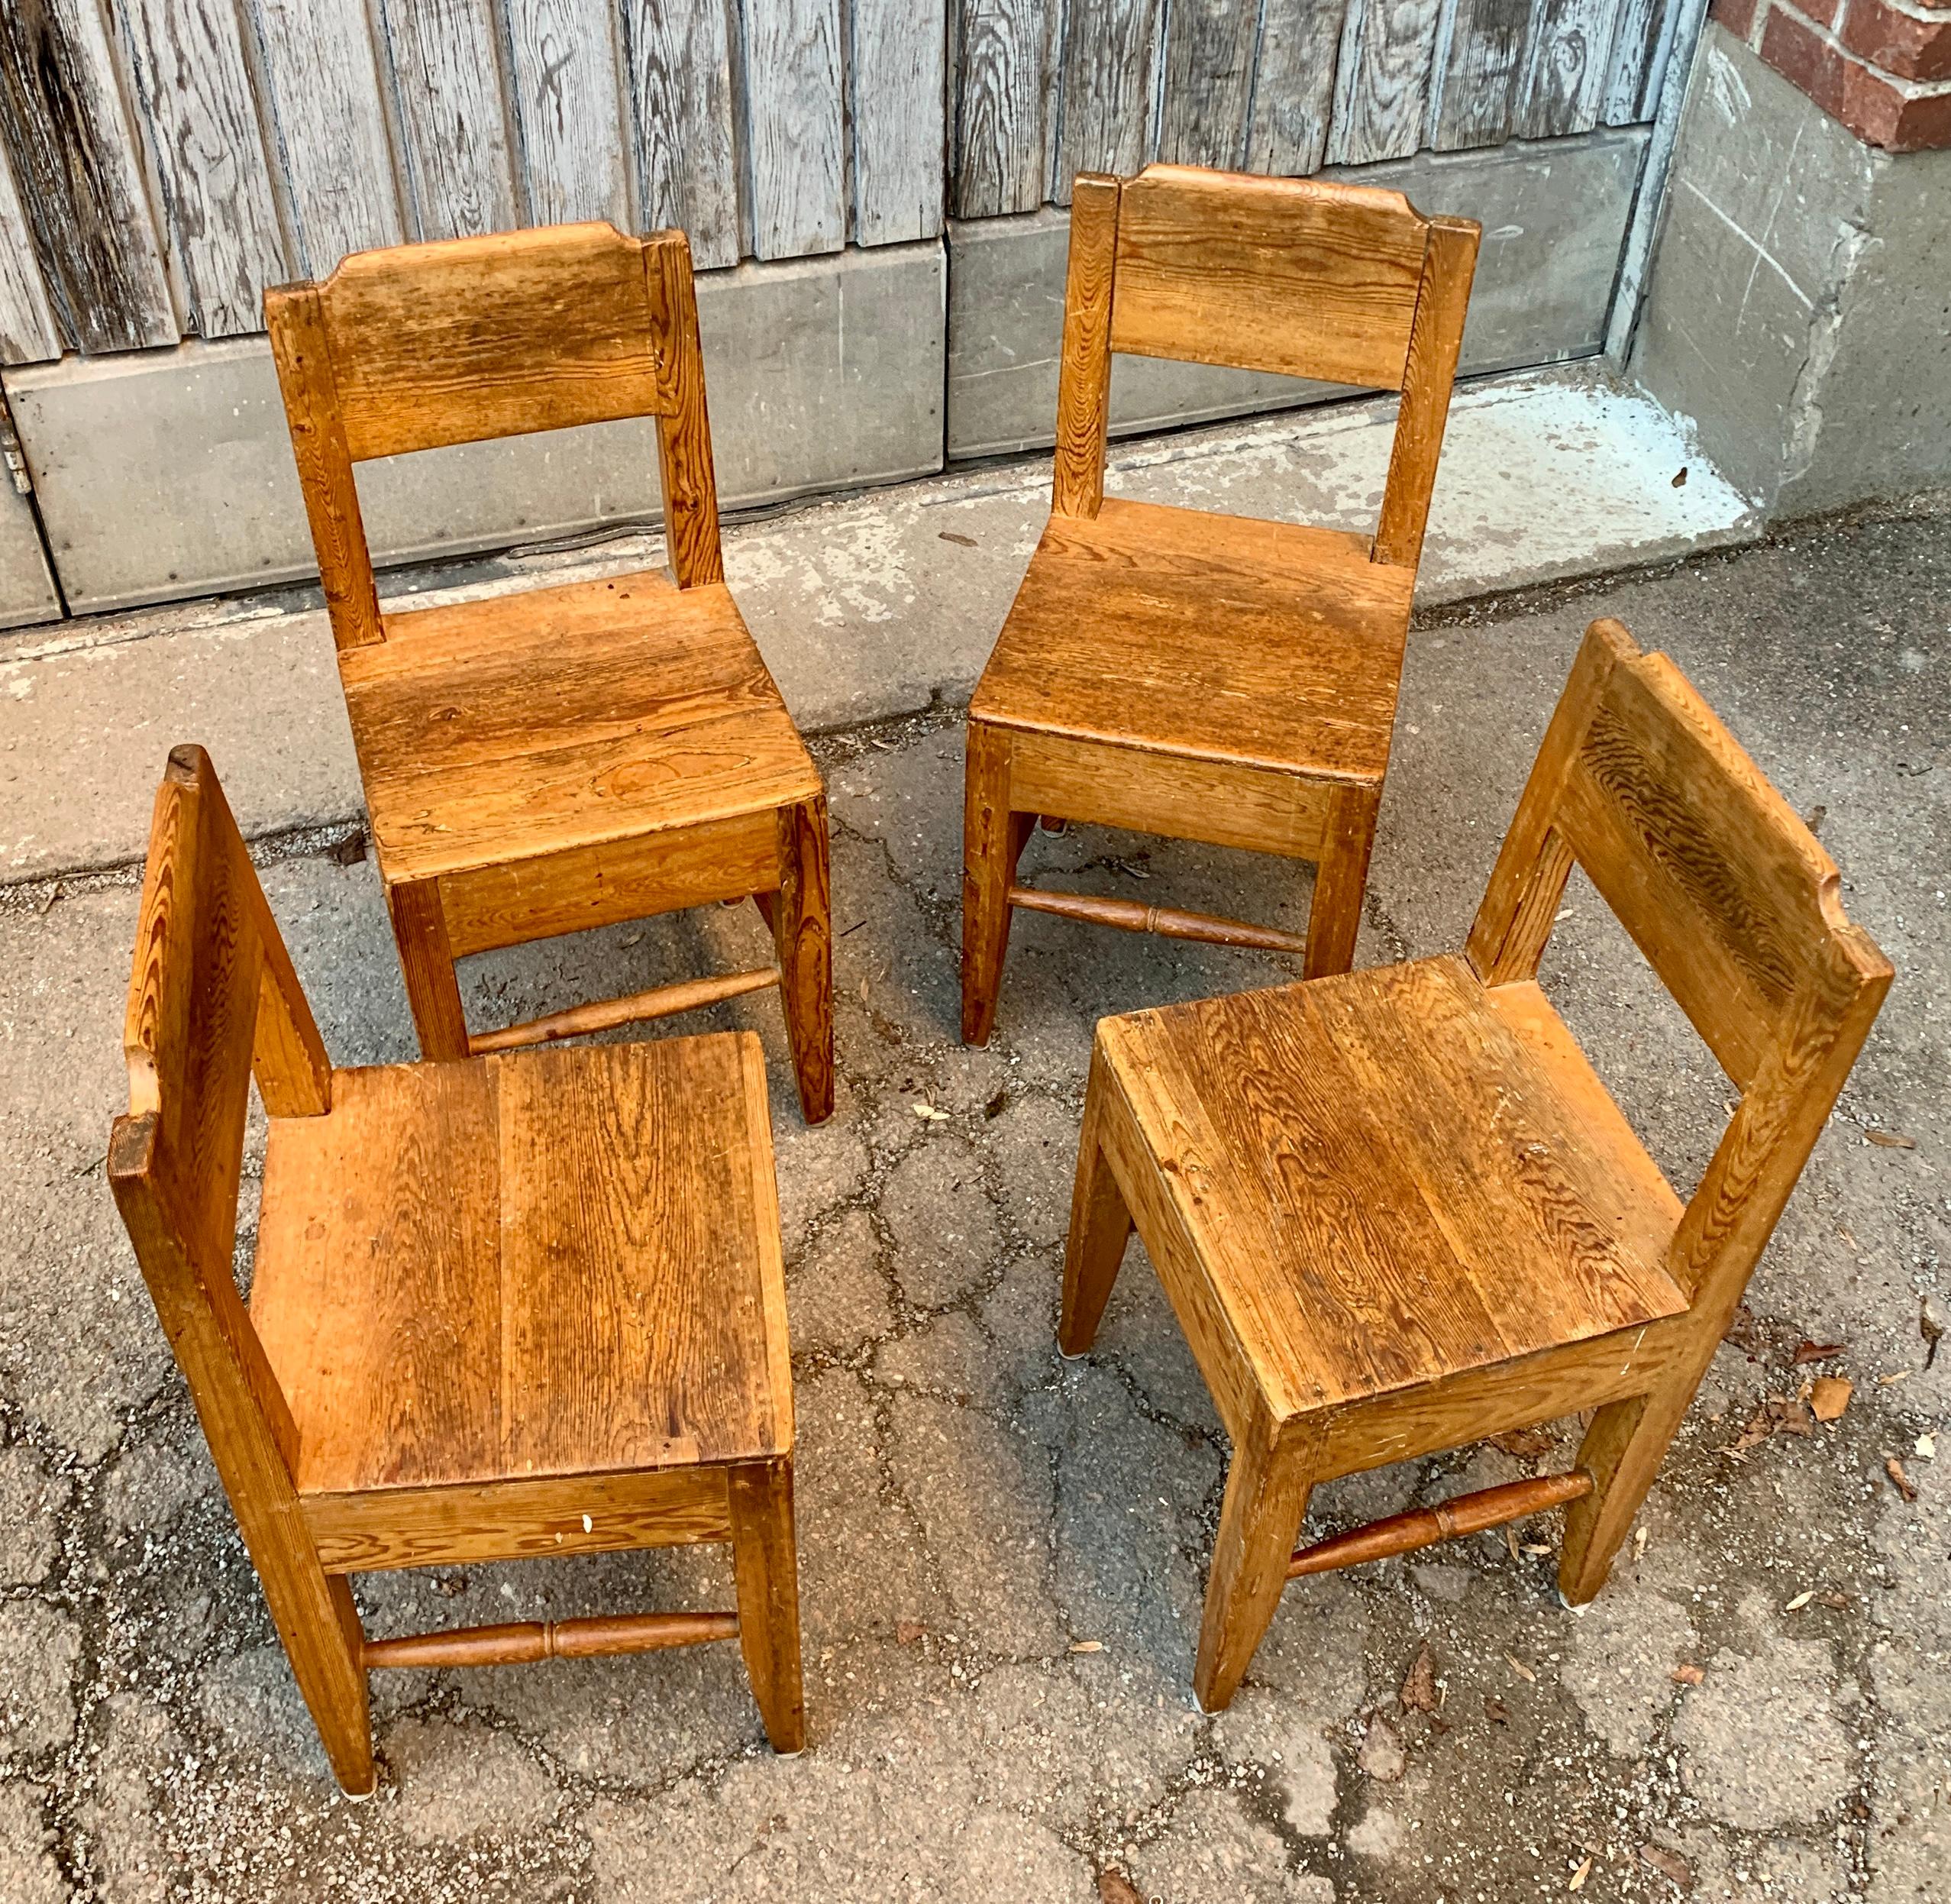 Hand-Crafted Set of 4 Small Swedish Folk Art Chairs, Early 19th Century